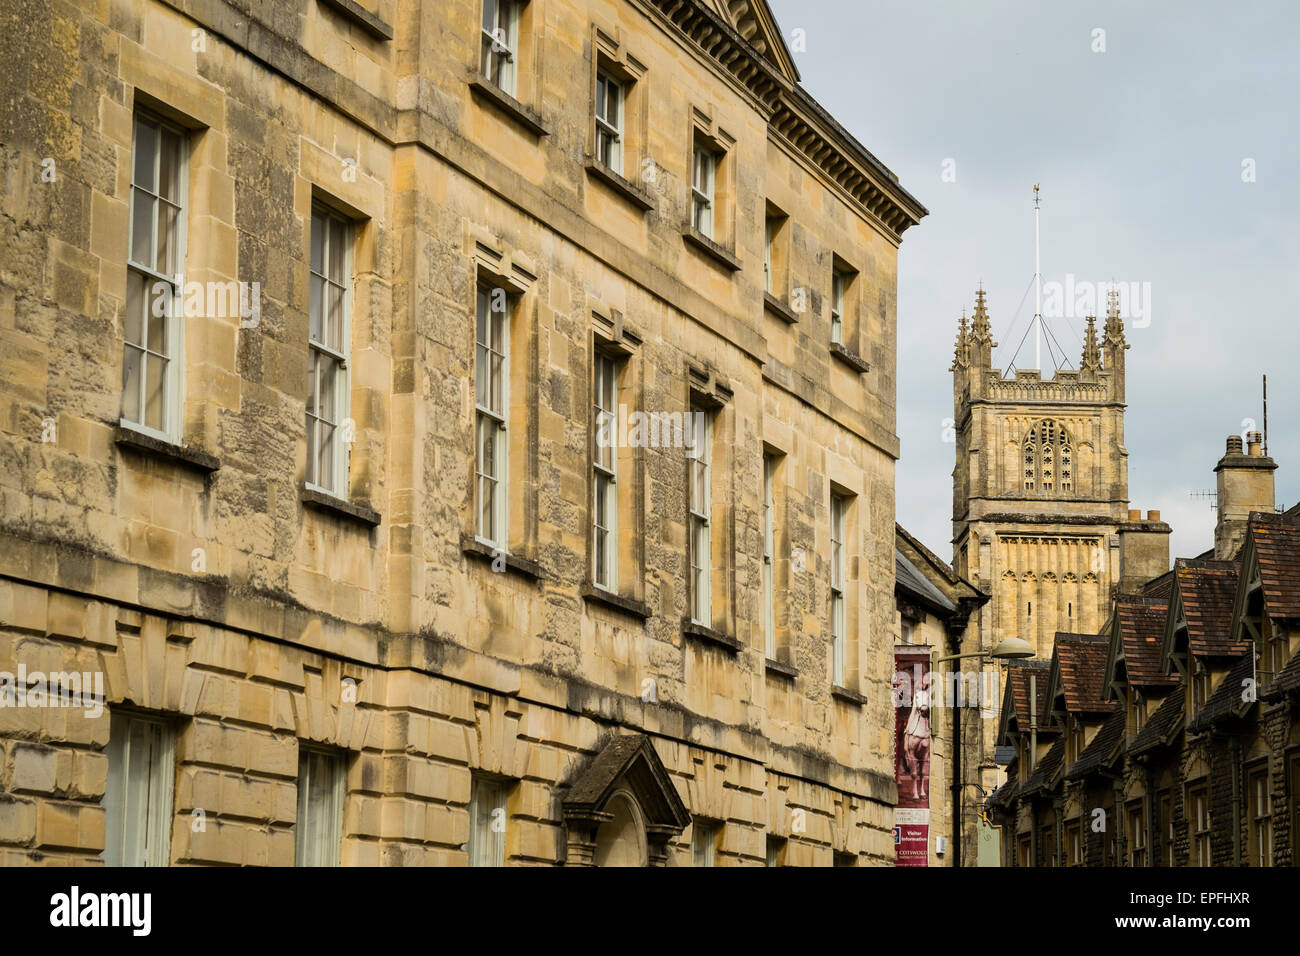 Typical cotswold stone buildings leading to the tower of the Parish Church of St John Baptist , a 'wool church' in Cirencester, Gloucestershire, England UK Stock Photo